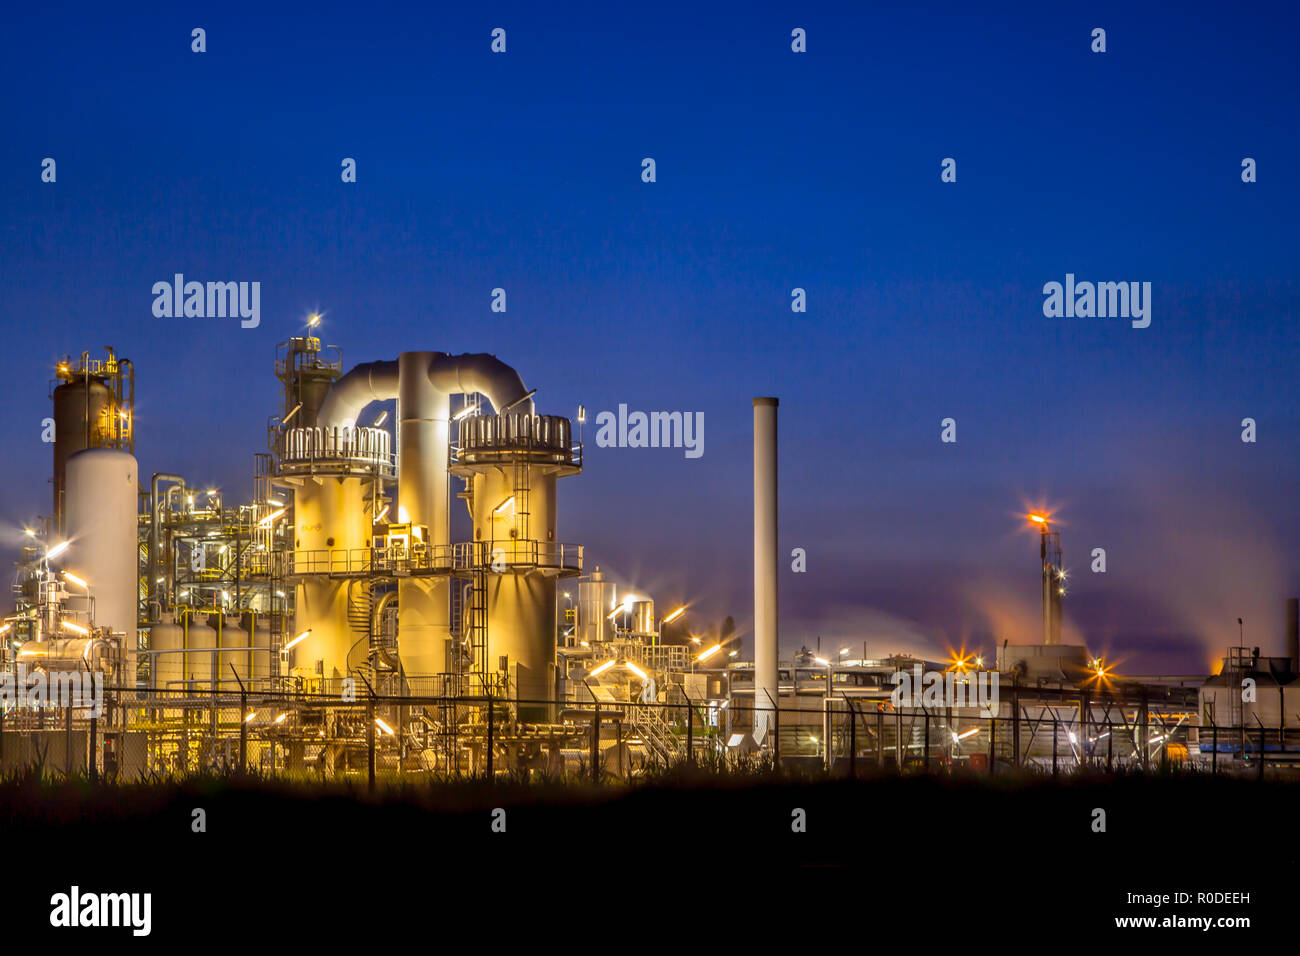 Landscape of a heavy Chemical Industrial plant with mazework of pipes in twilight night scene Stock Photo